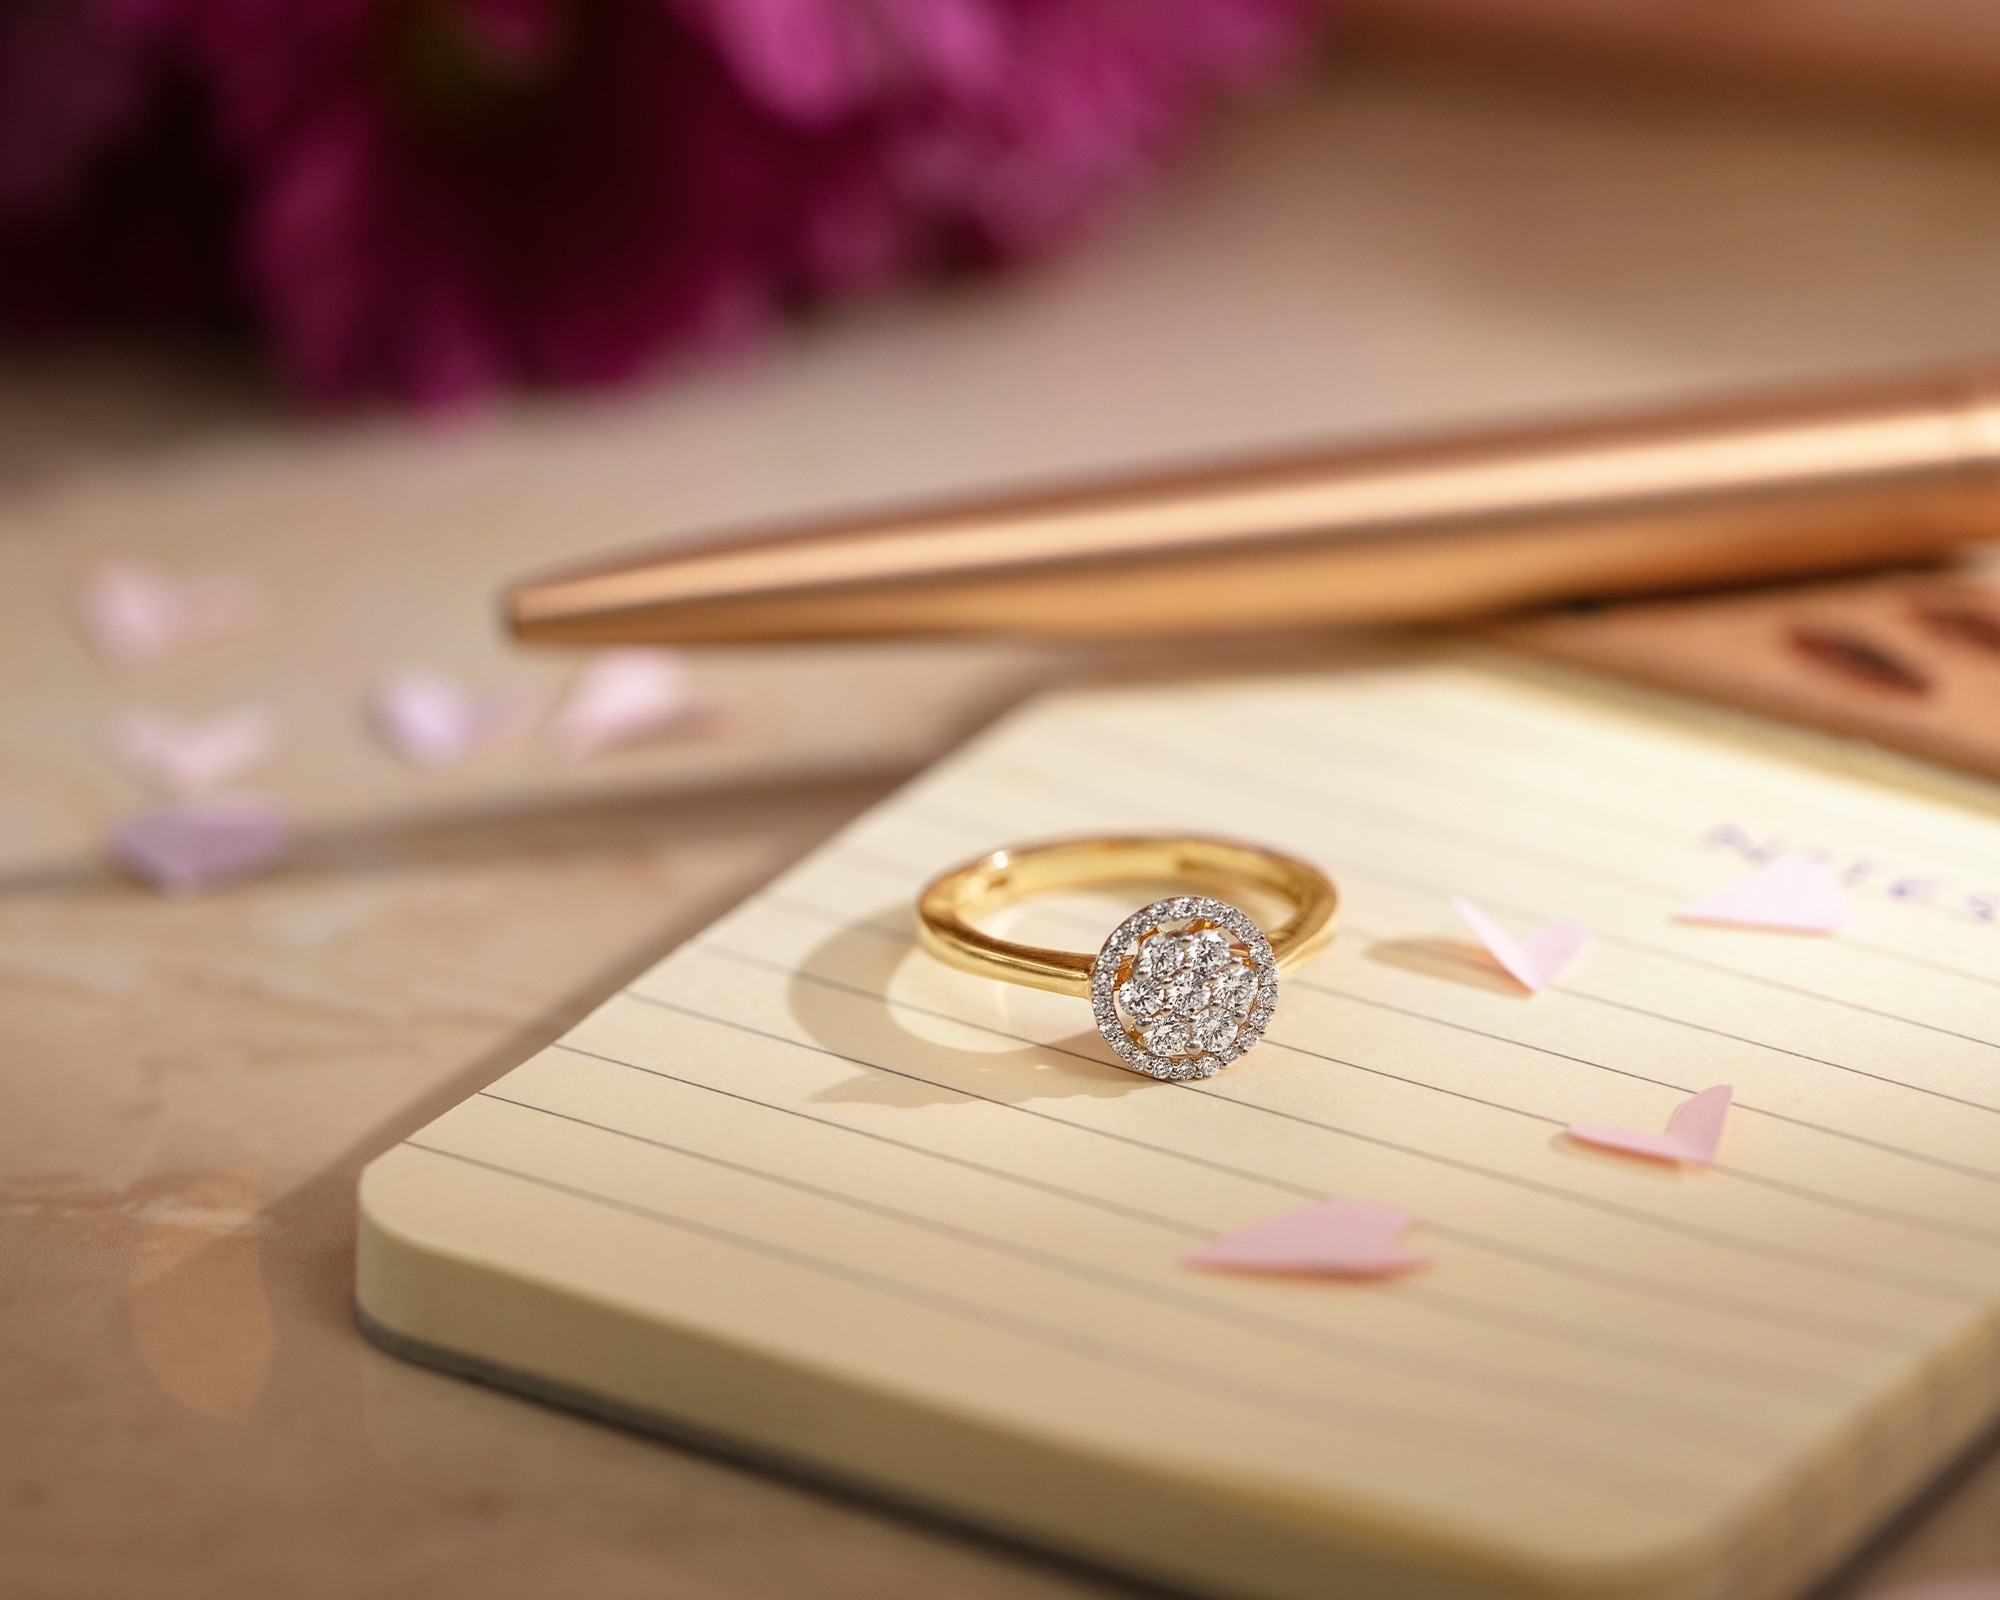 Classic ring gifts for V-day